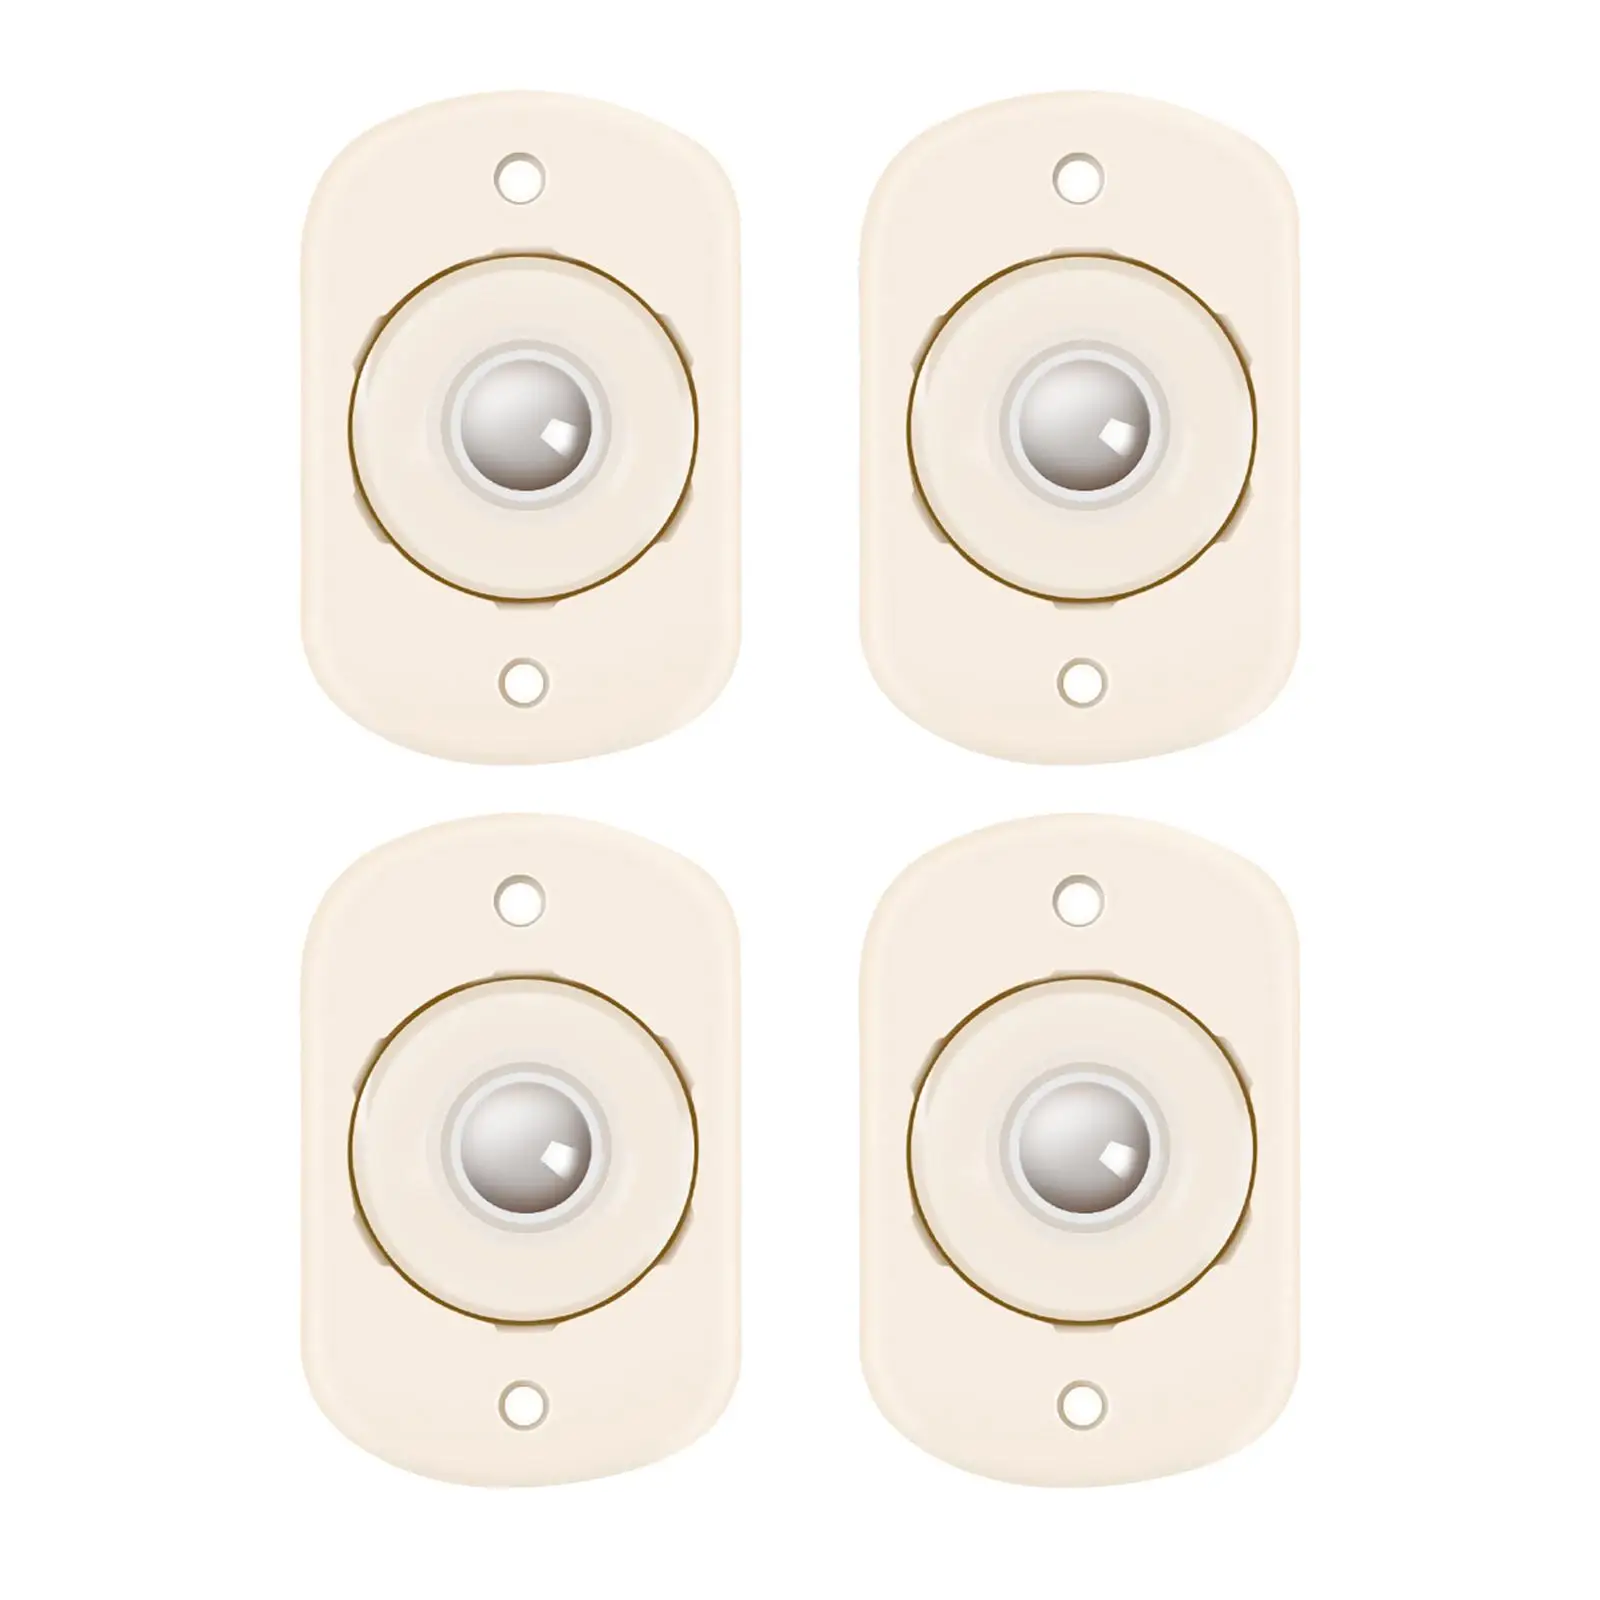 4x Self Adhesive Caster Wheels Mini Swivel Wheels Furniture Pulley Castor Bedroom Office Universal Pulley for Storage Box Moving